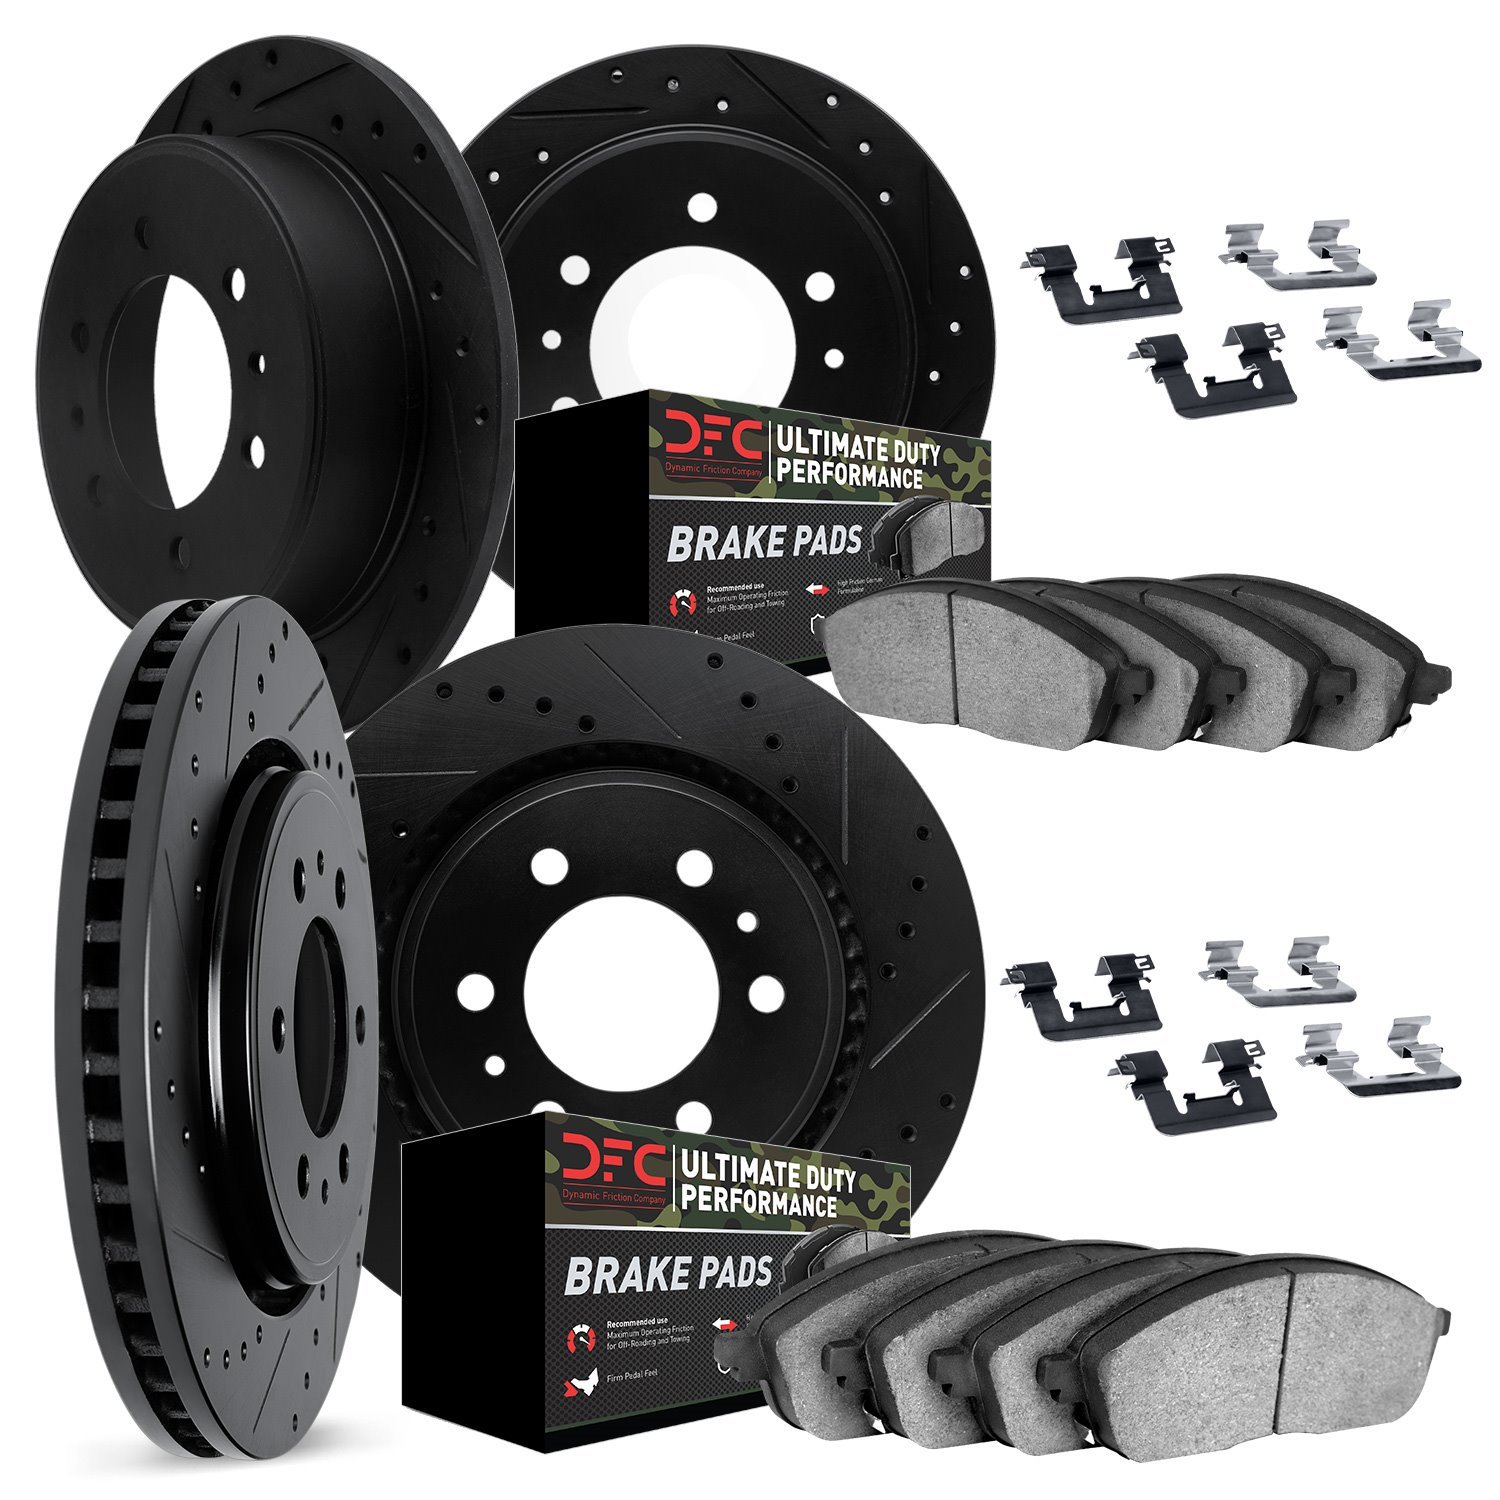 8414-67001 Drilled/Slotted Brake Rotors with Ultimate-Duty Brake Pads Kit & Hardware [Black], 2004-2005 Infiniti/Nissan, Positio